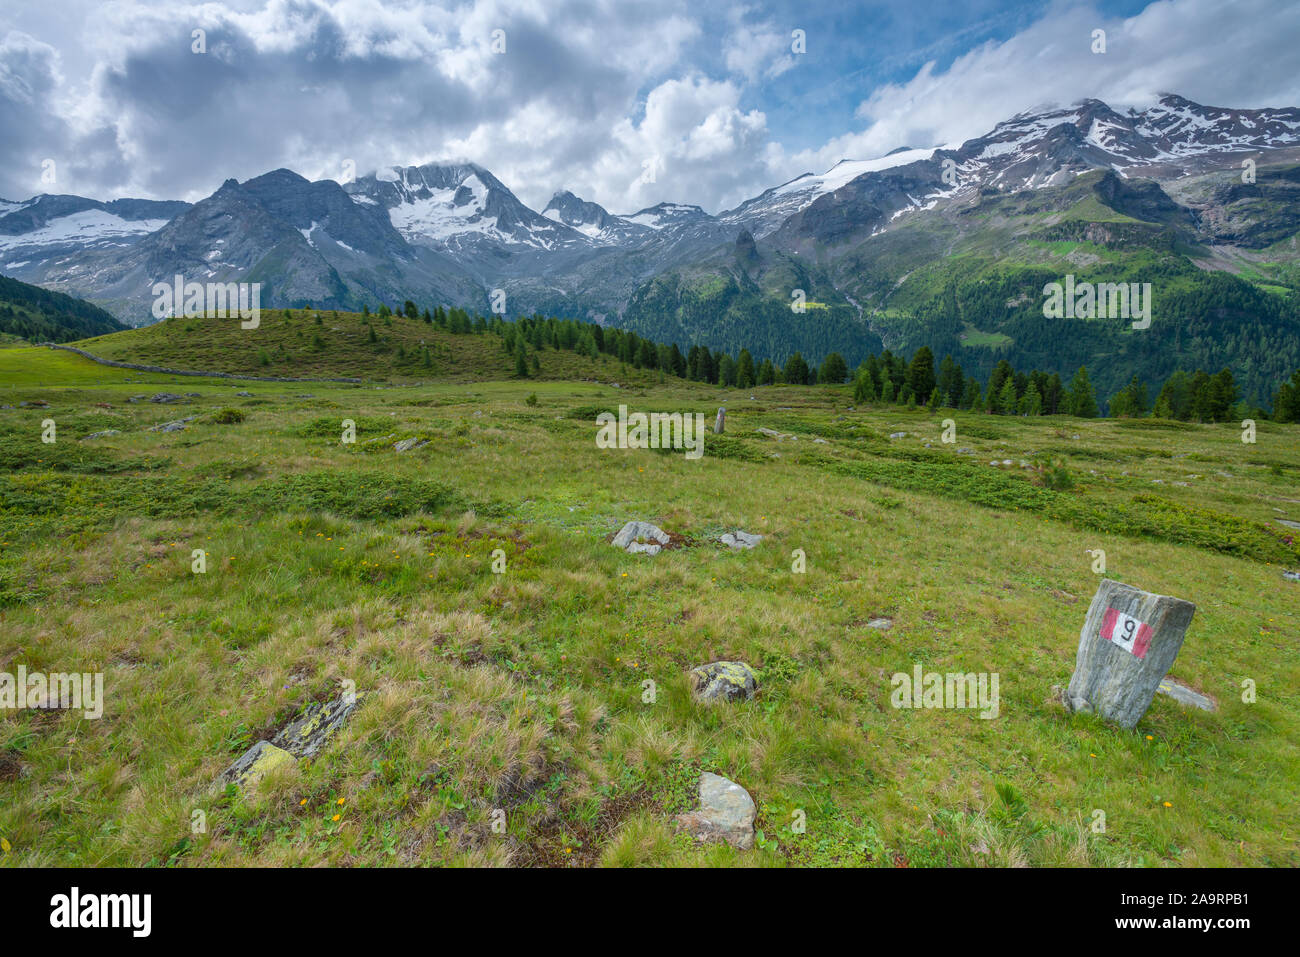 Alpine meadows and forest below snowcapped mountain range. Trail marker, sign post for summer hiking trail in the Alps. Stock Photo